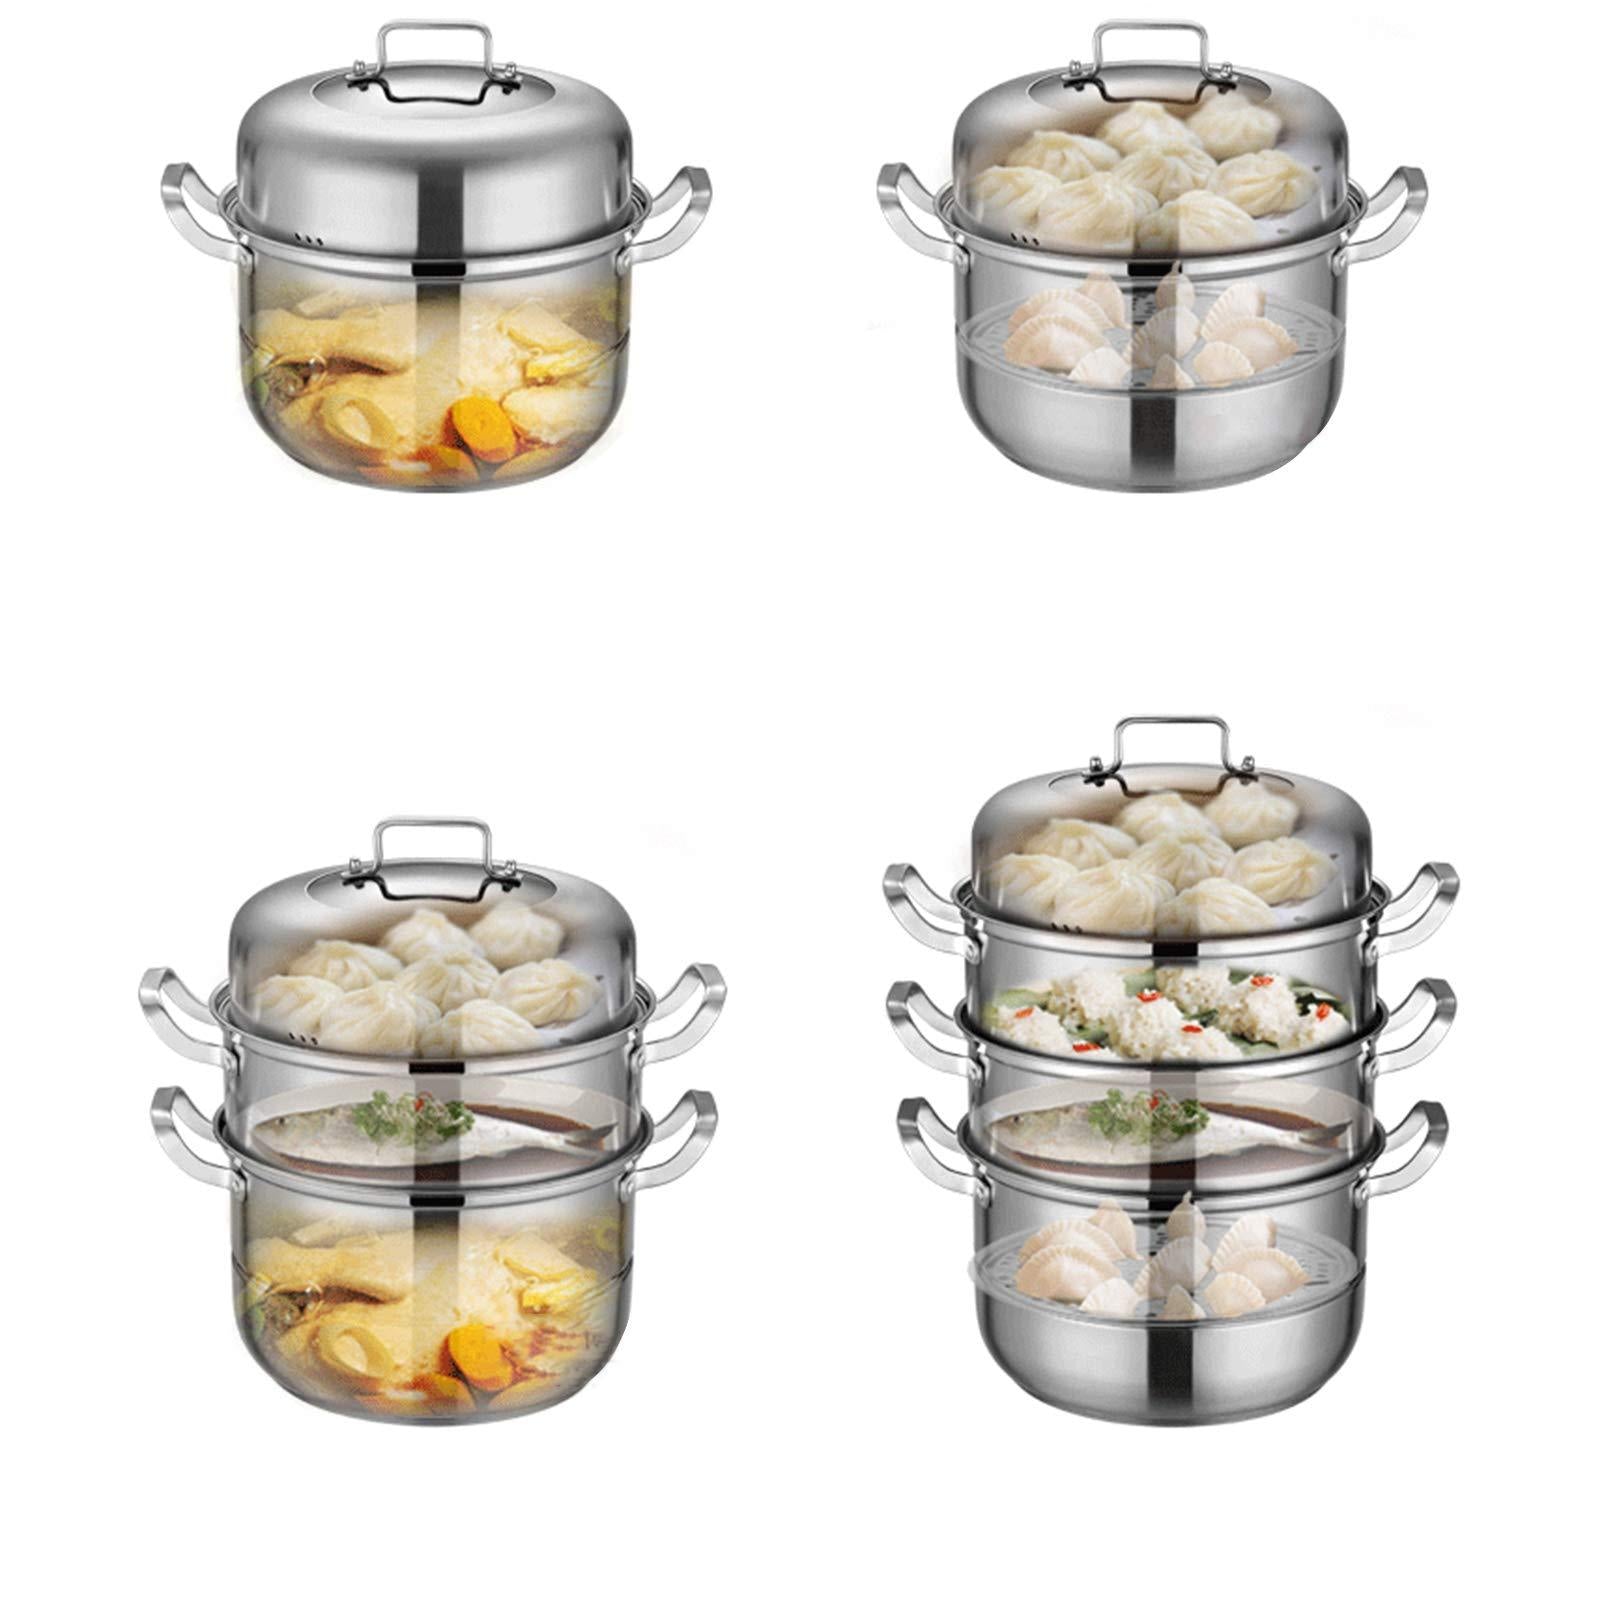 Food-Grade Standard with Cooker Accessories 